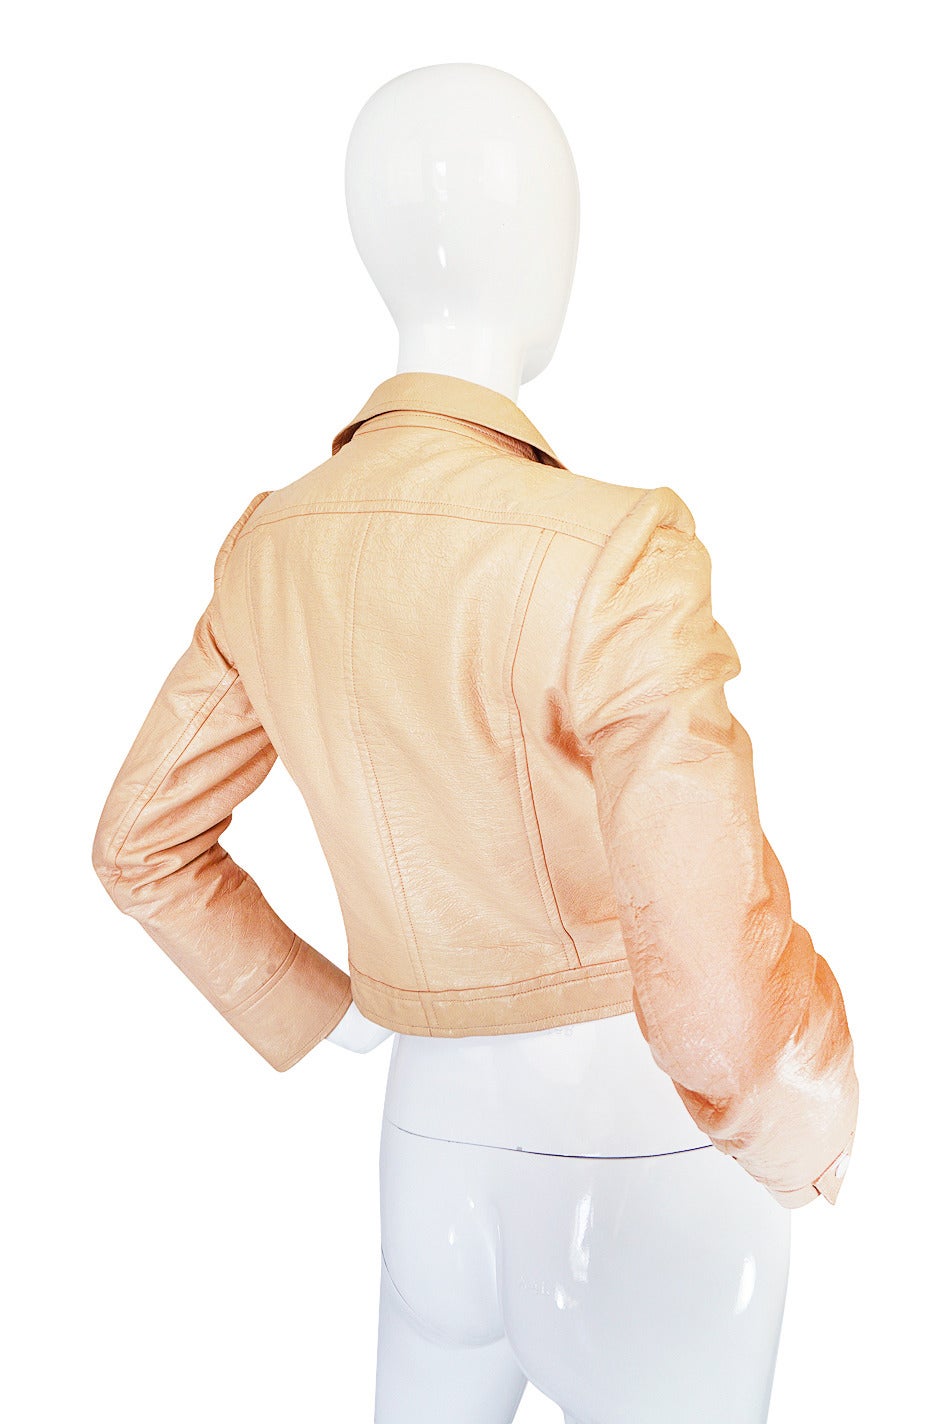 Andre Courreges made cloth and wool versions of this cropped jacket in 1968 and repeated versions of them for his next few collections as they were immensely popular. For the 1971-72 collection he did them in vinyl and showed them over ribbed under